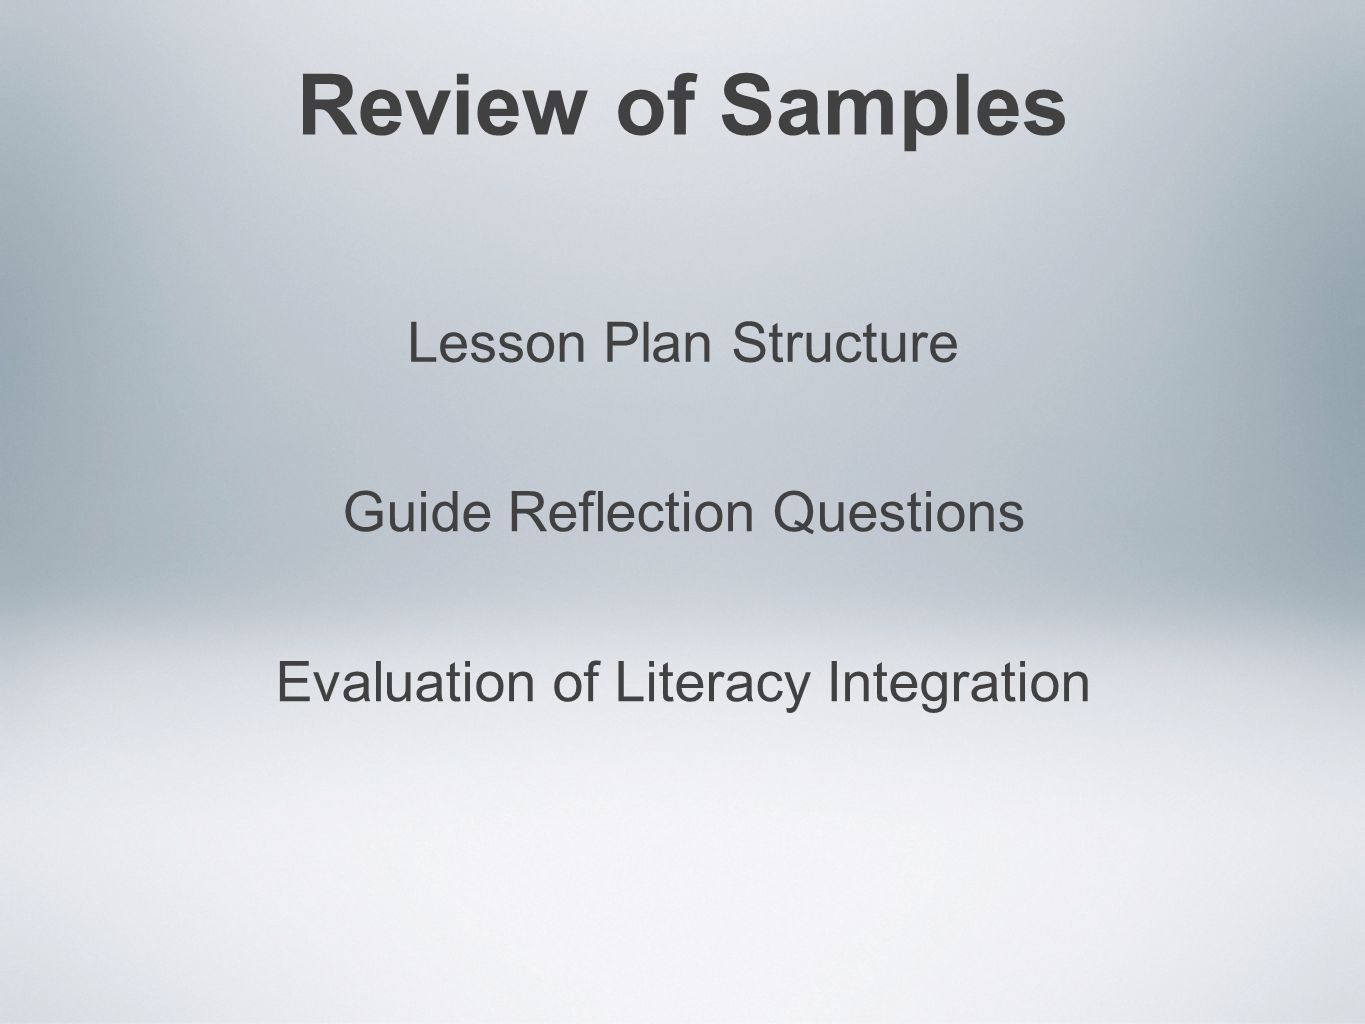 Review of Samples Lesson Plan Structure Guide Reflection Questions Evaluation of Literacy Integration